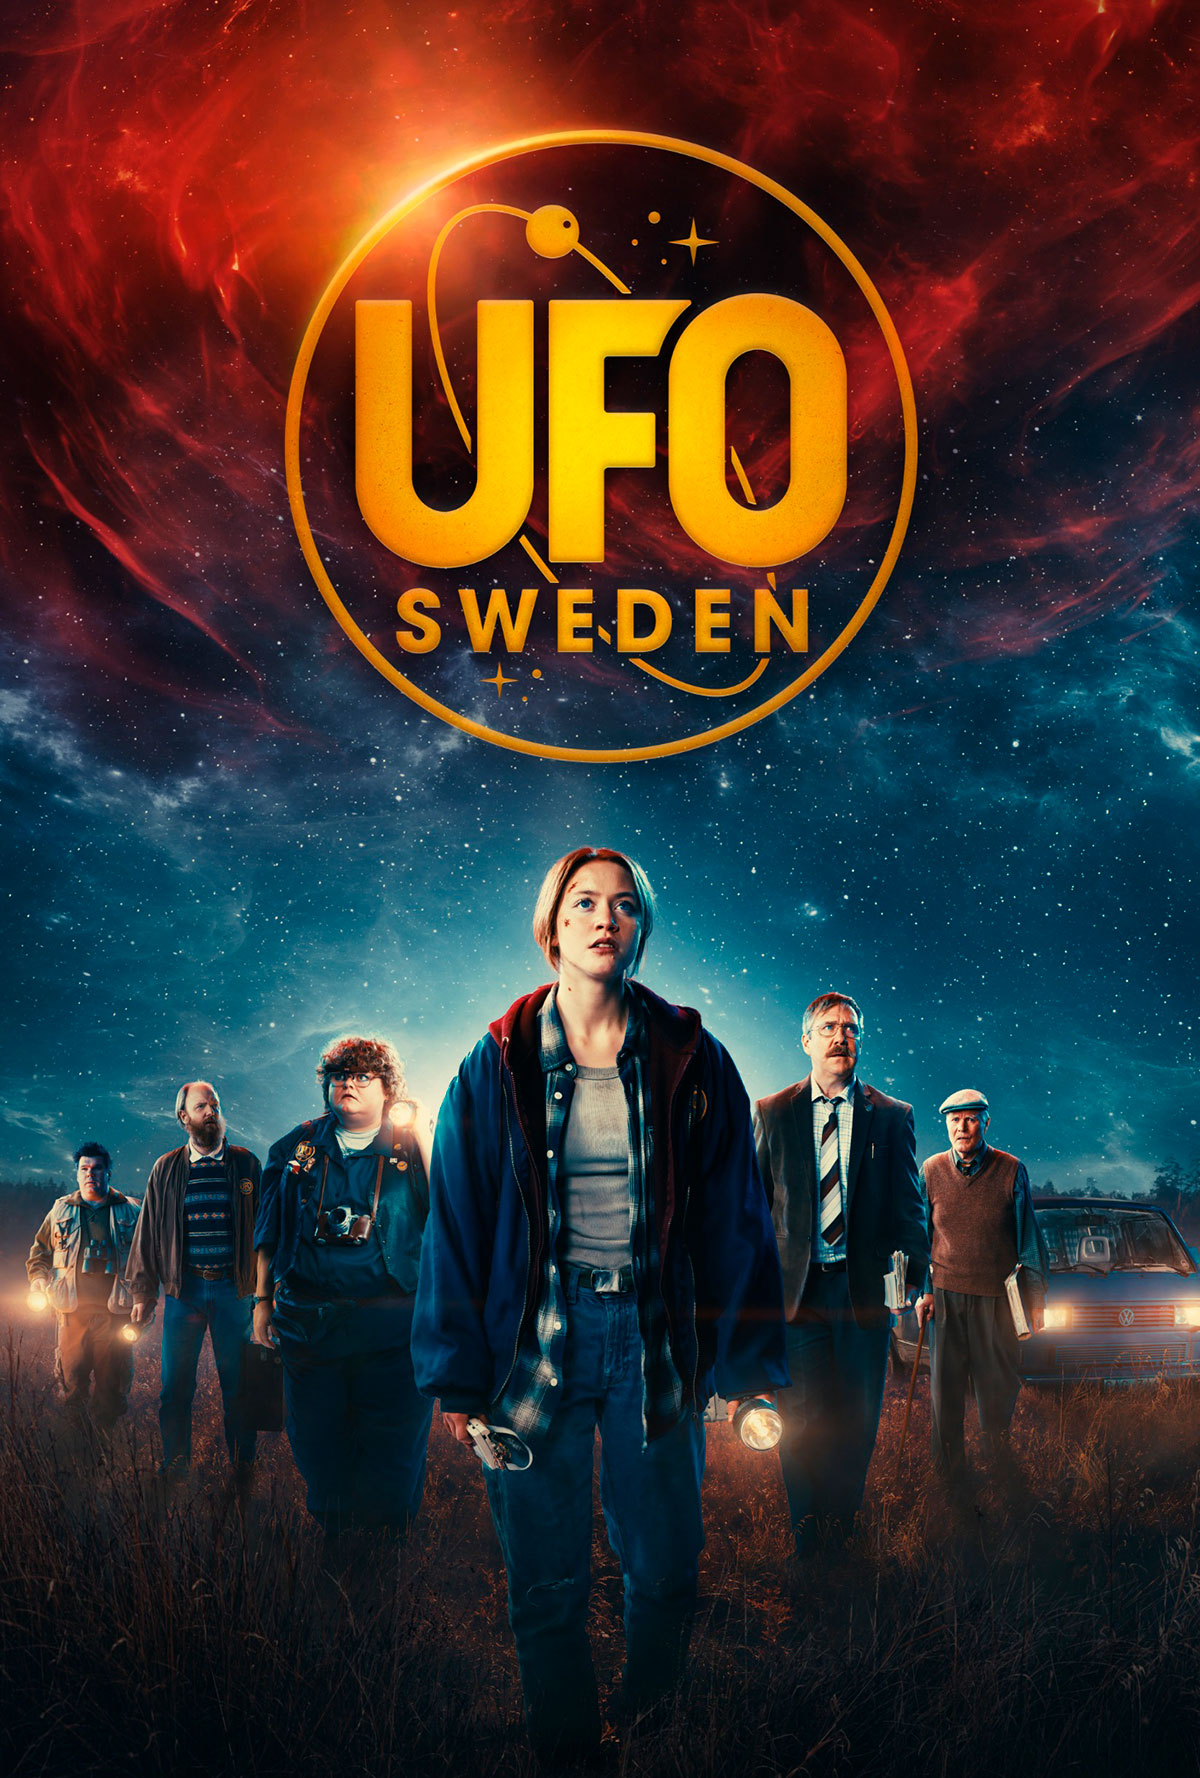 UFO Sweden, by Crazy Pictures.